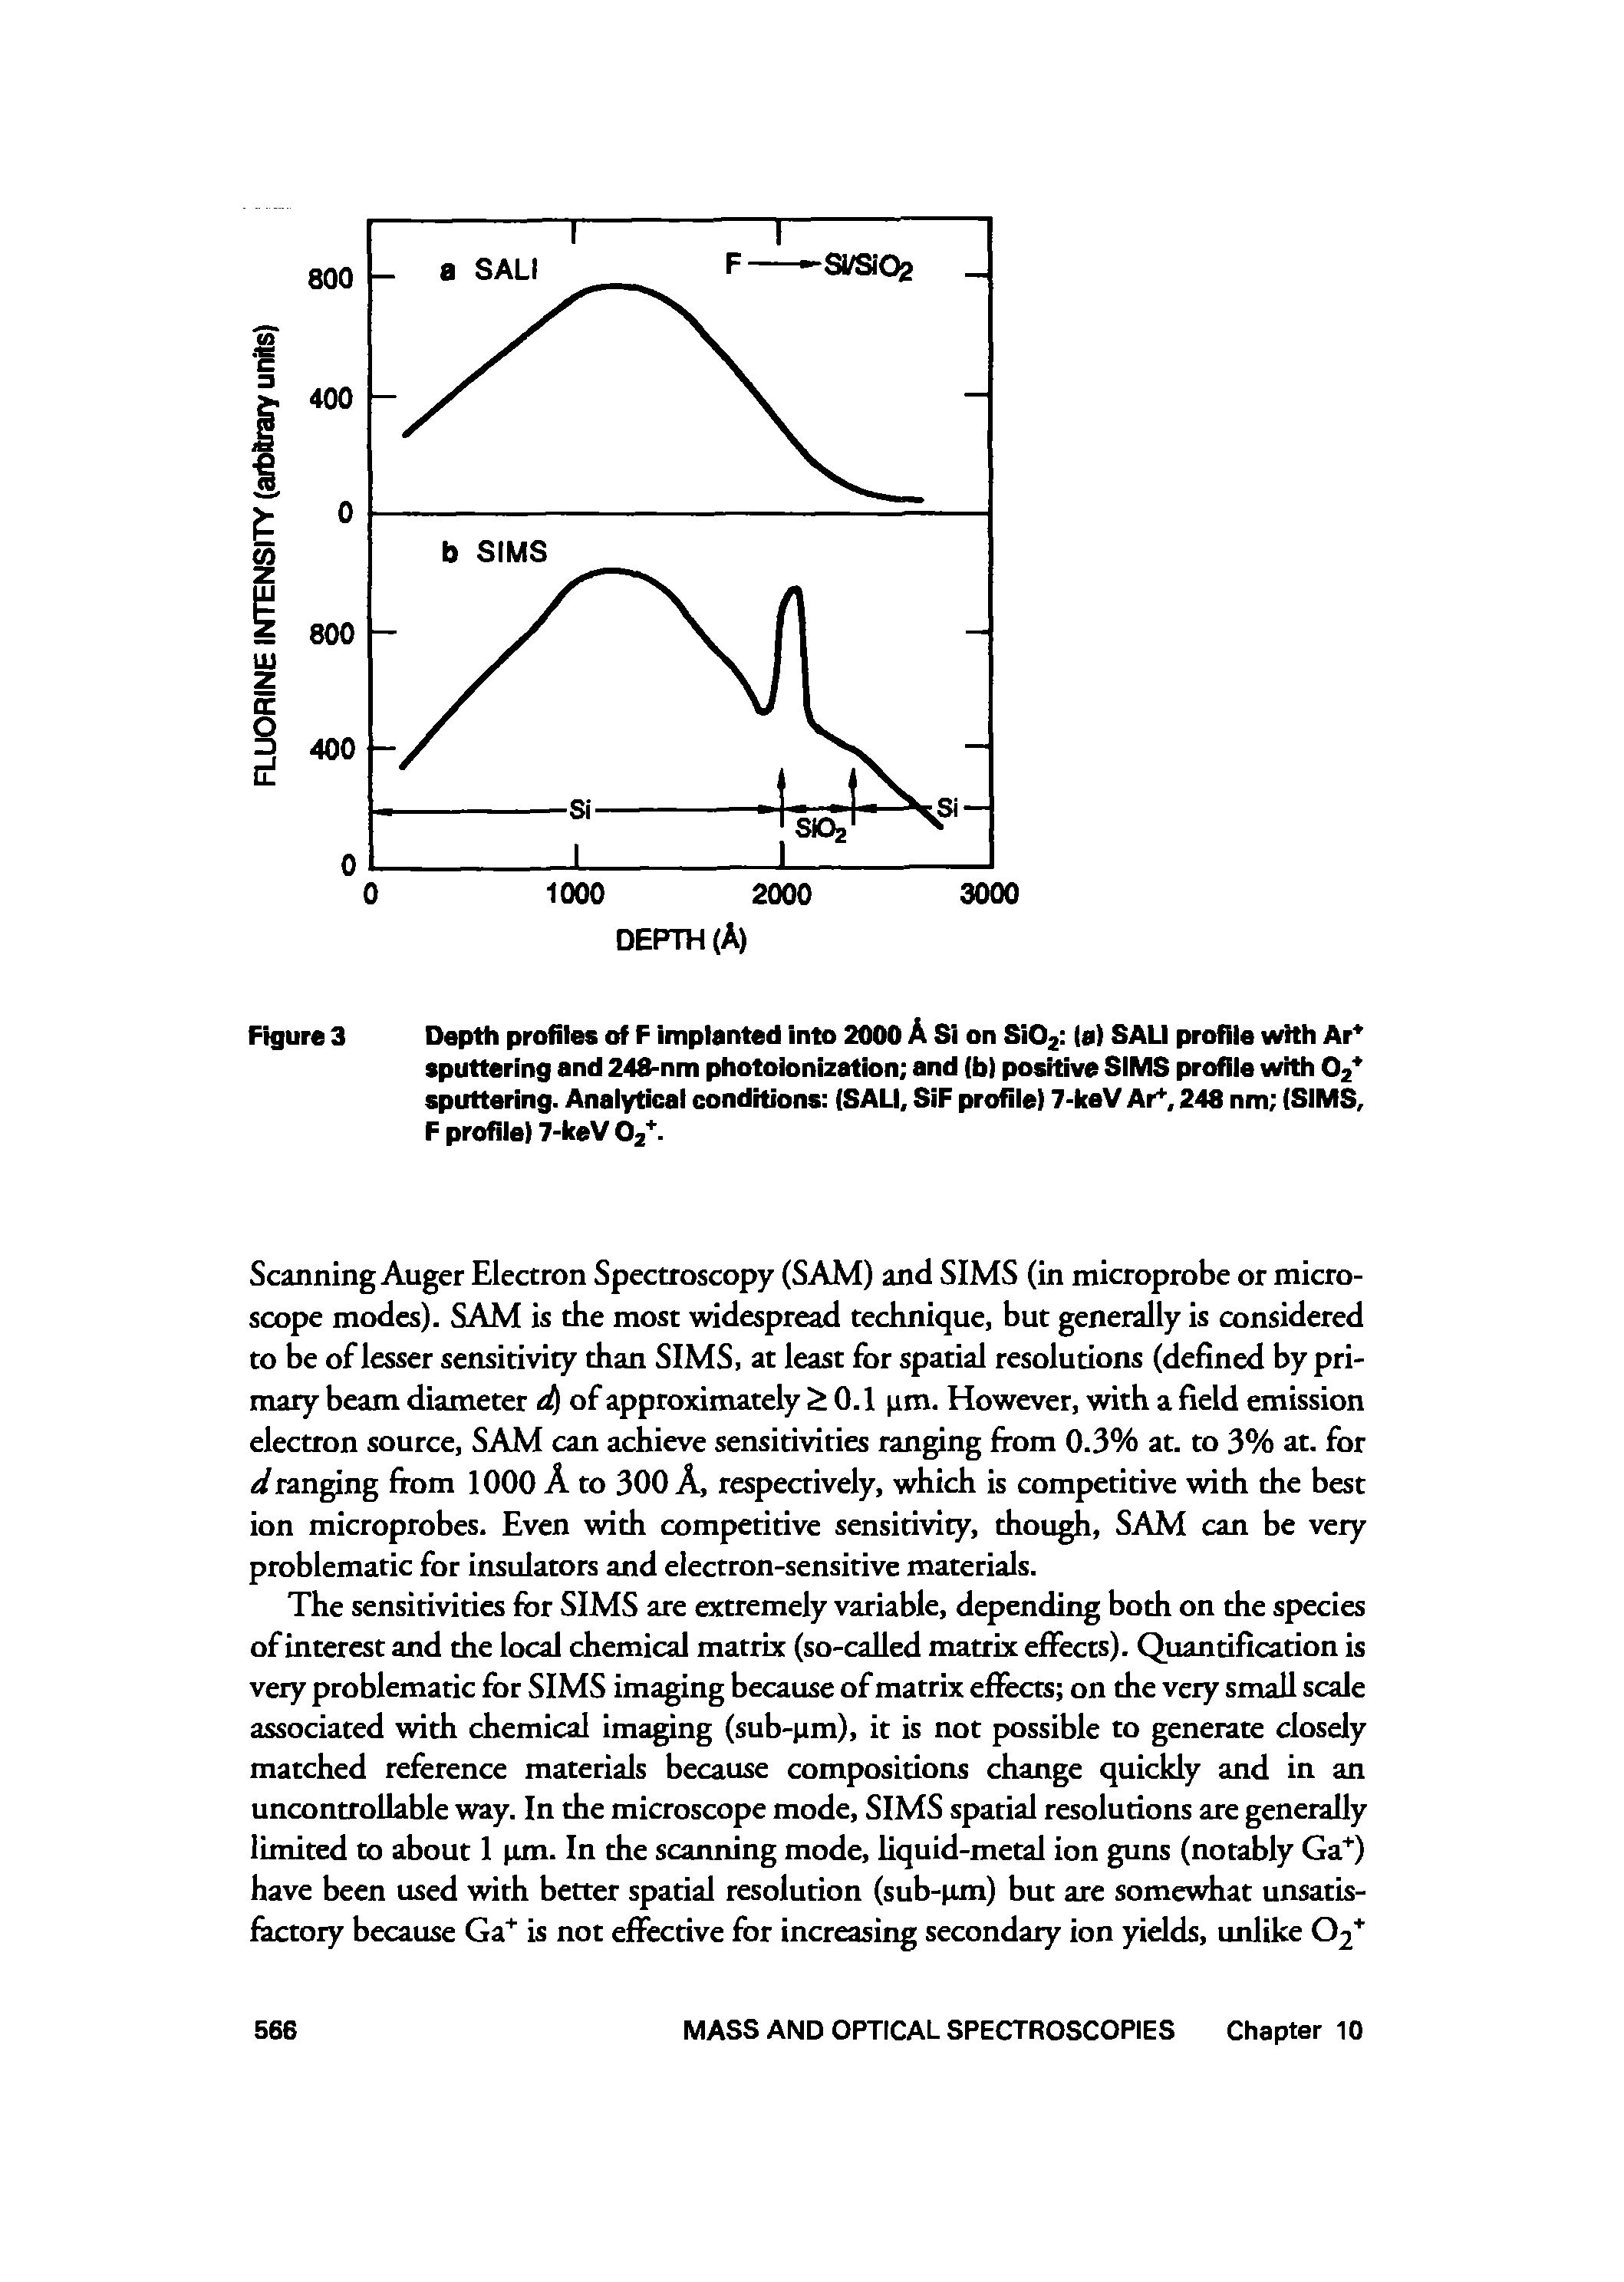 Figure 3 Depth profiles of F implanted into 2000 A Si on Si02 la) SALI profile with Ar sputtering and 248-nm photoionization and (b) positive SIMS profile with O2 sputtering. Analytical conditions SALI, SiF profile) 7-keV Ar, 248 nm SIMS, F profile) 7-keV02 ...